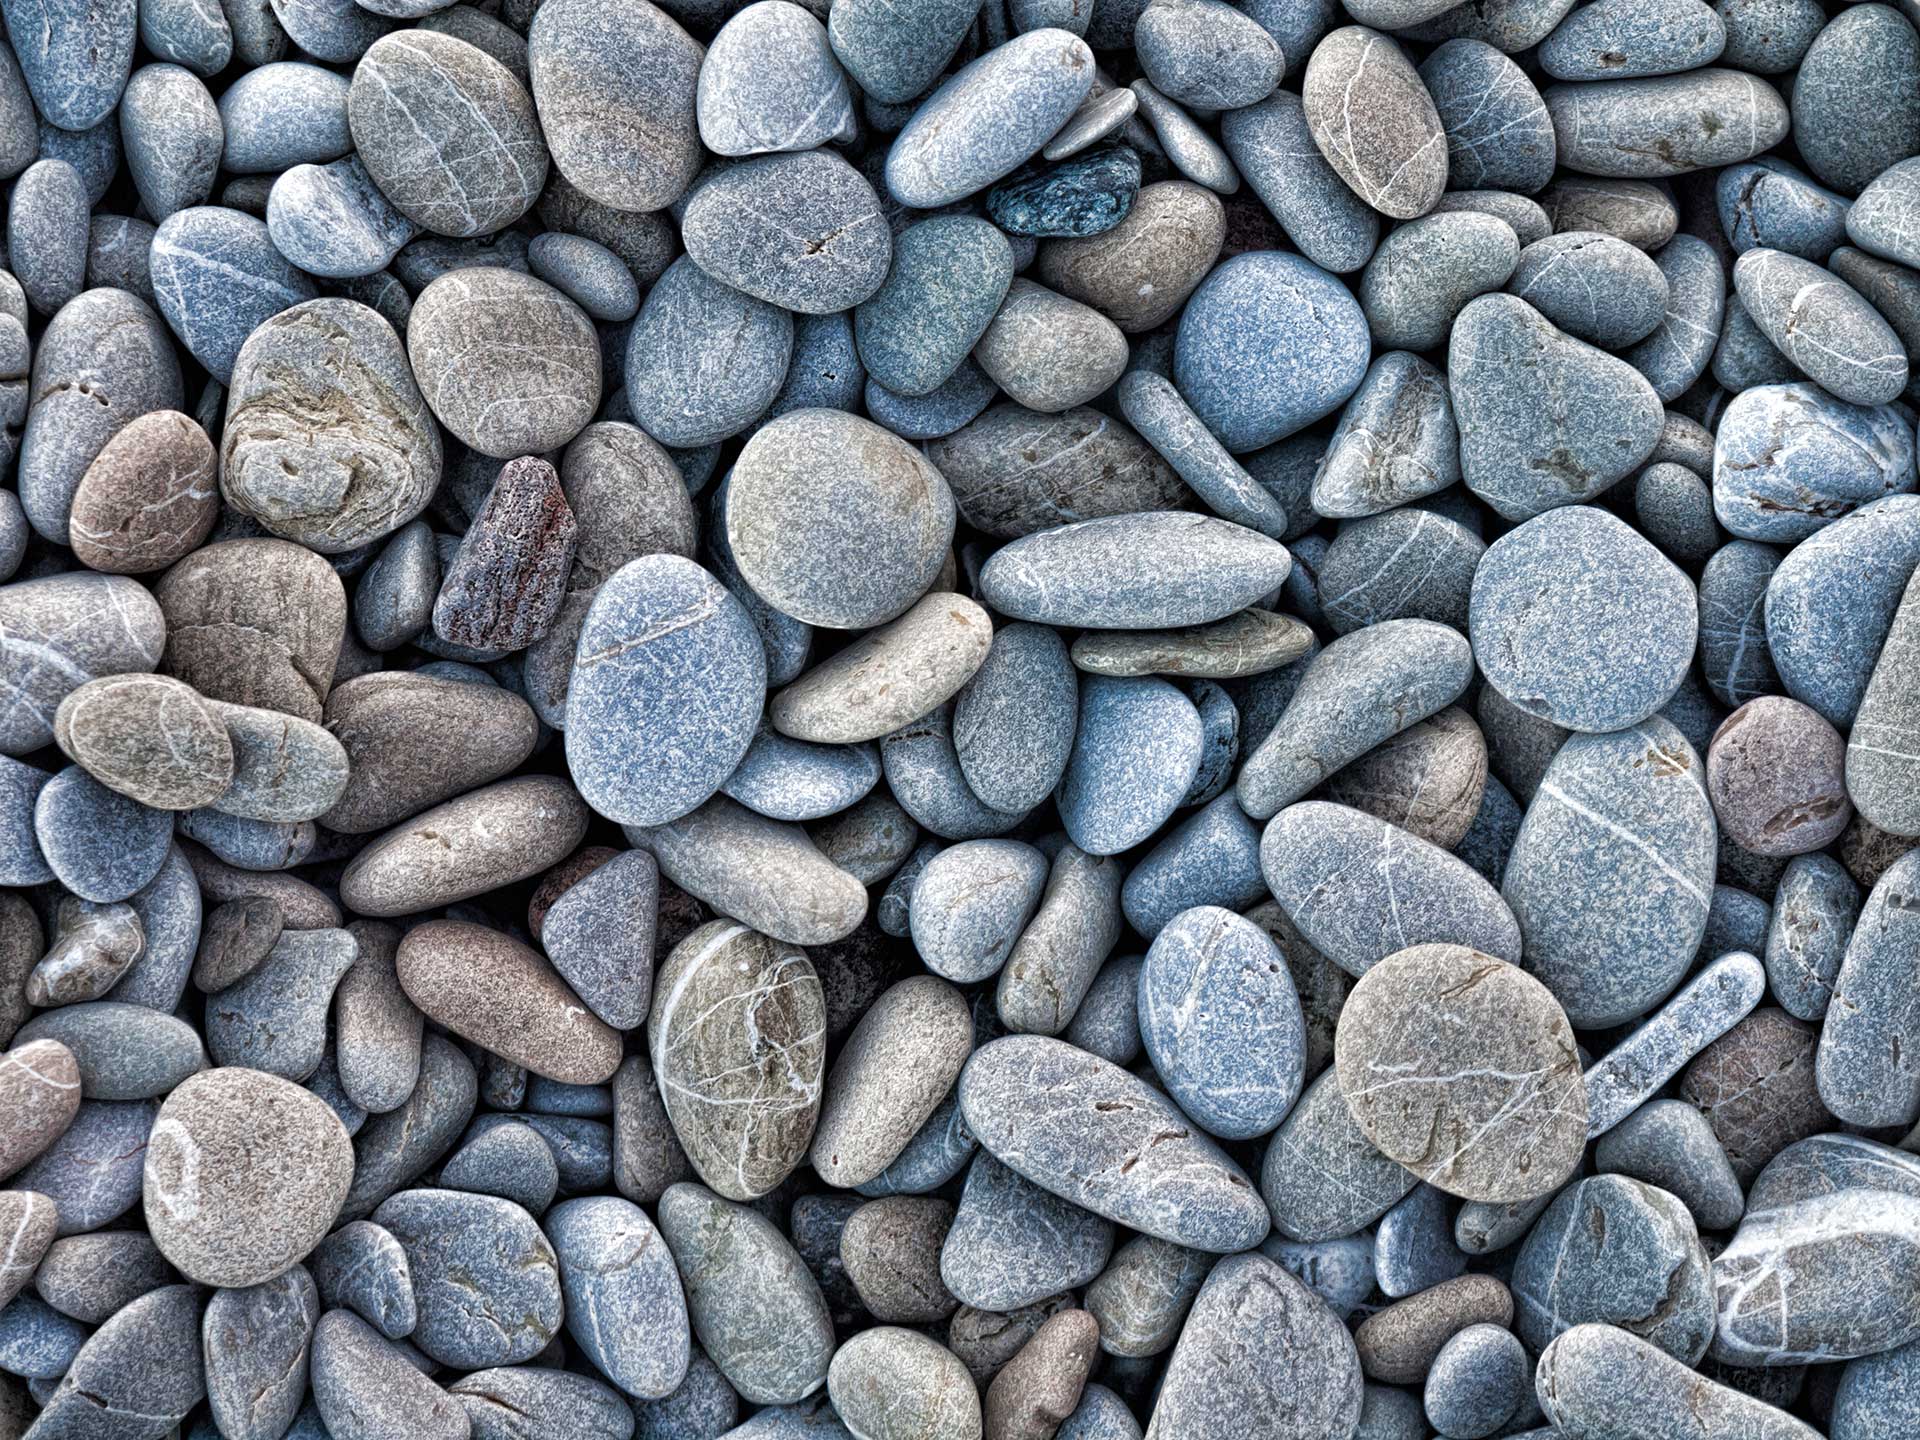 a collection of beach rocks and pebbles